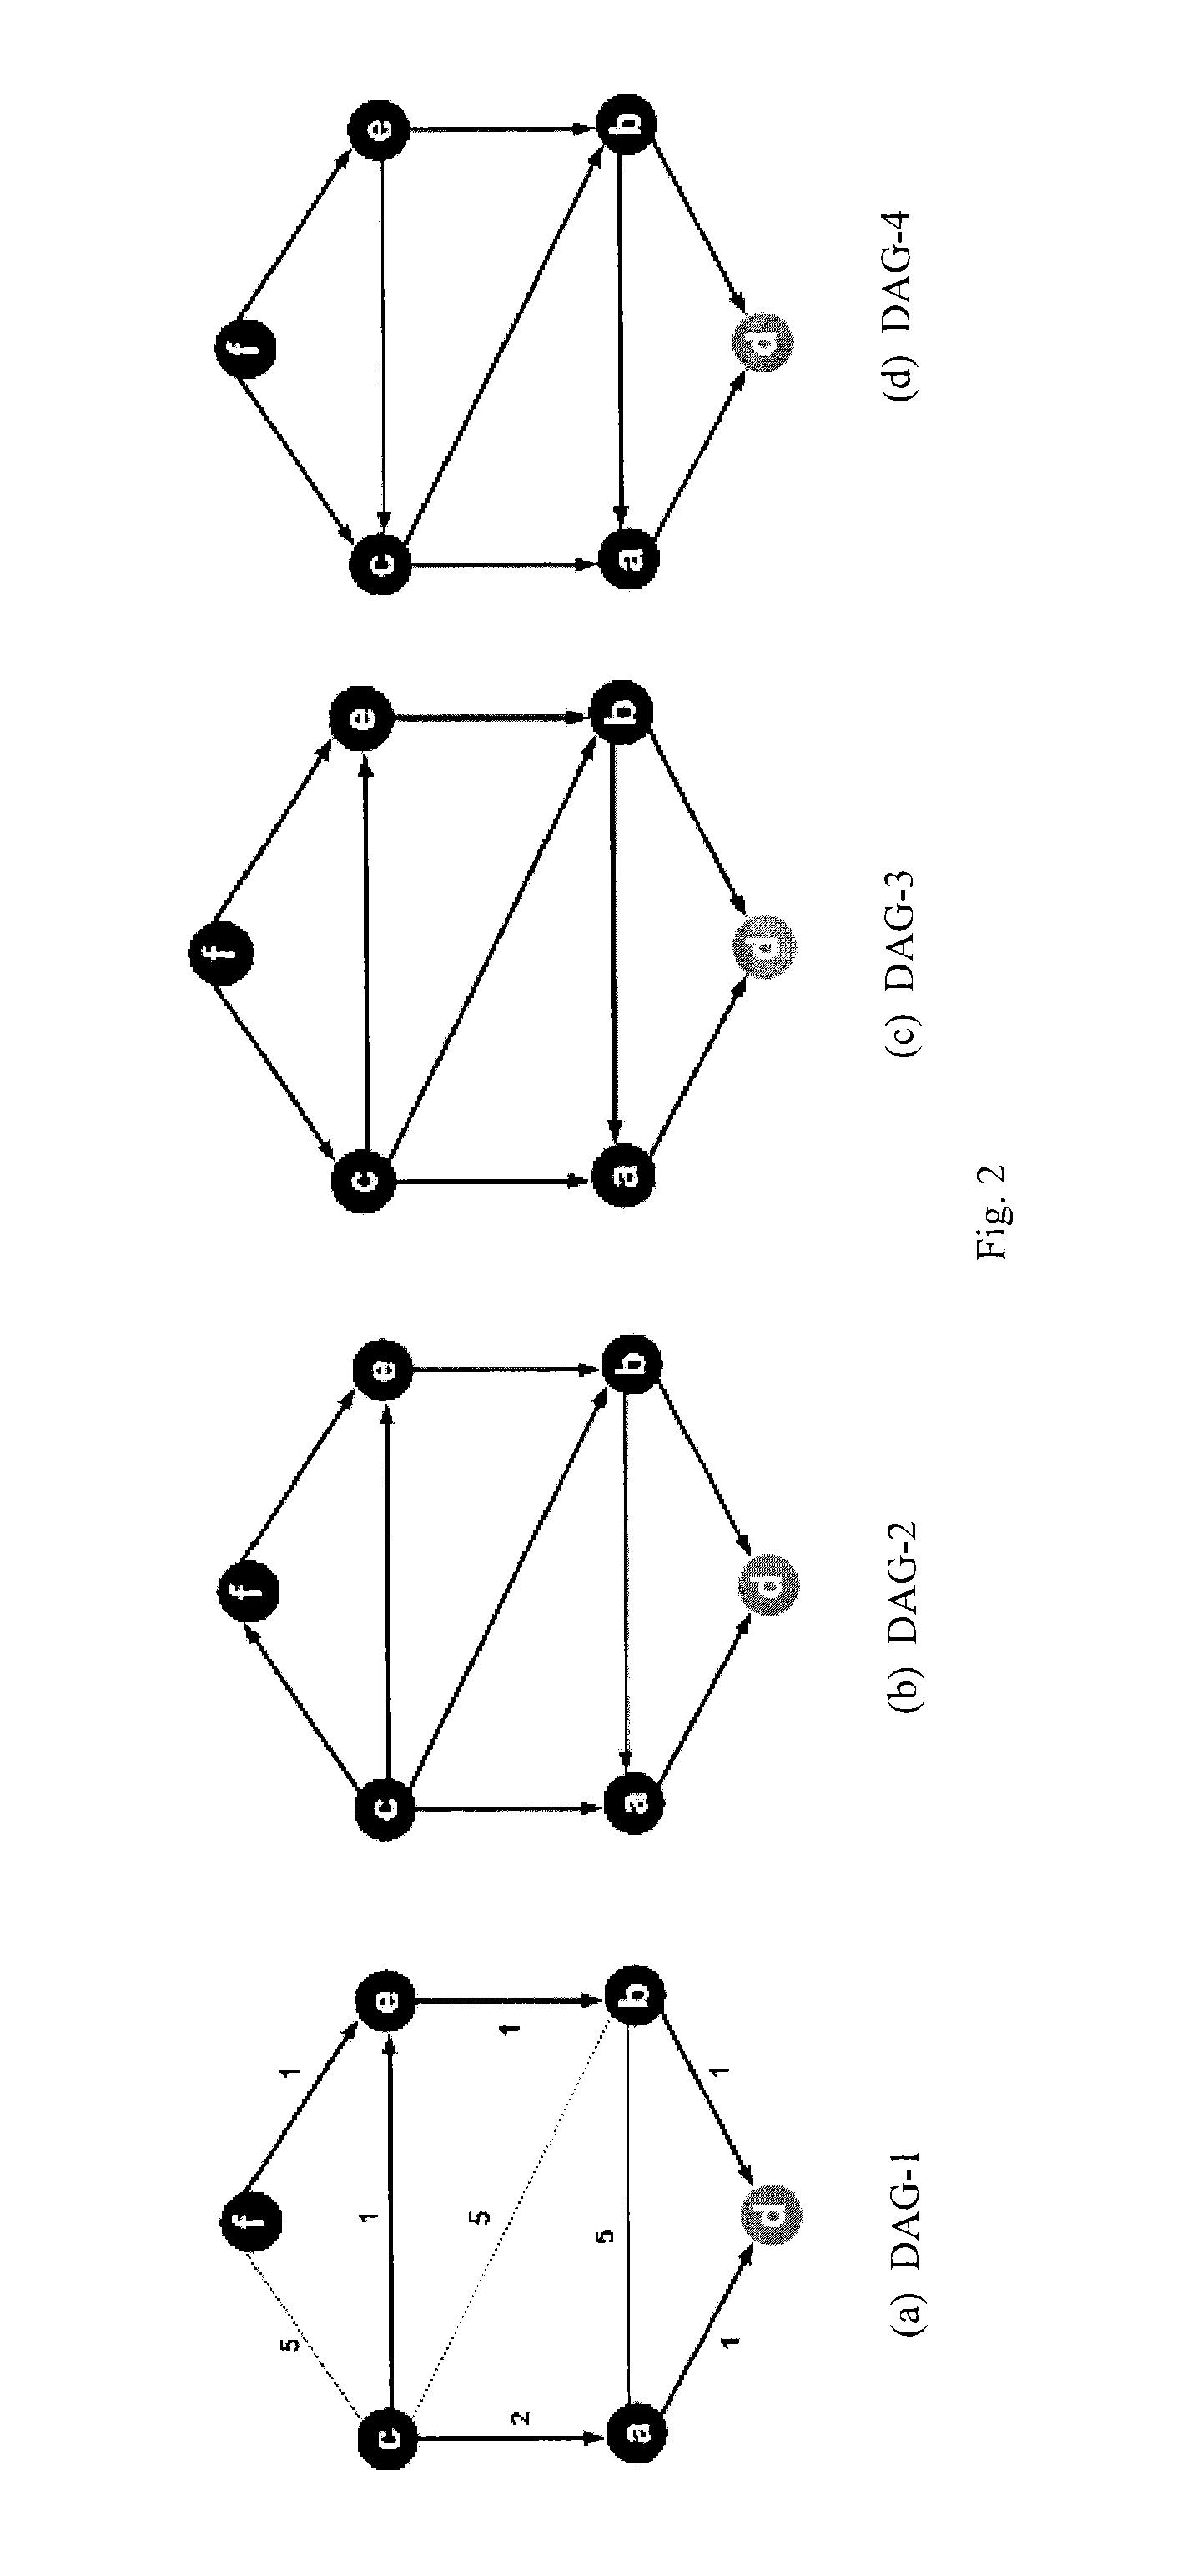 Method and apparatus for determining paths between source/destination pairs